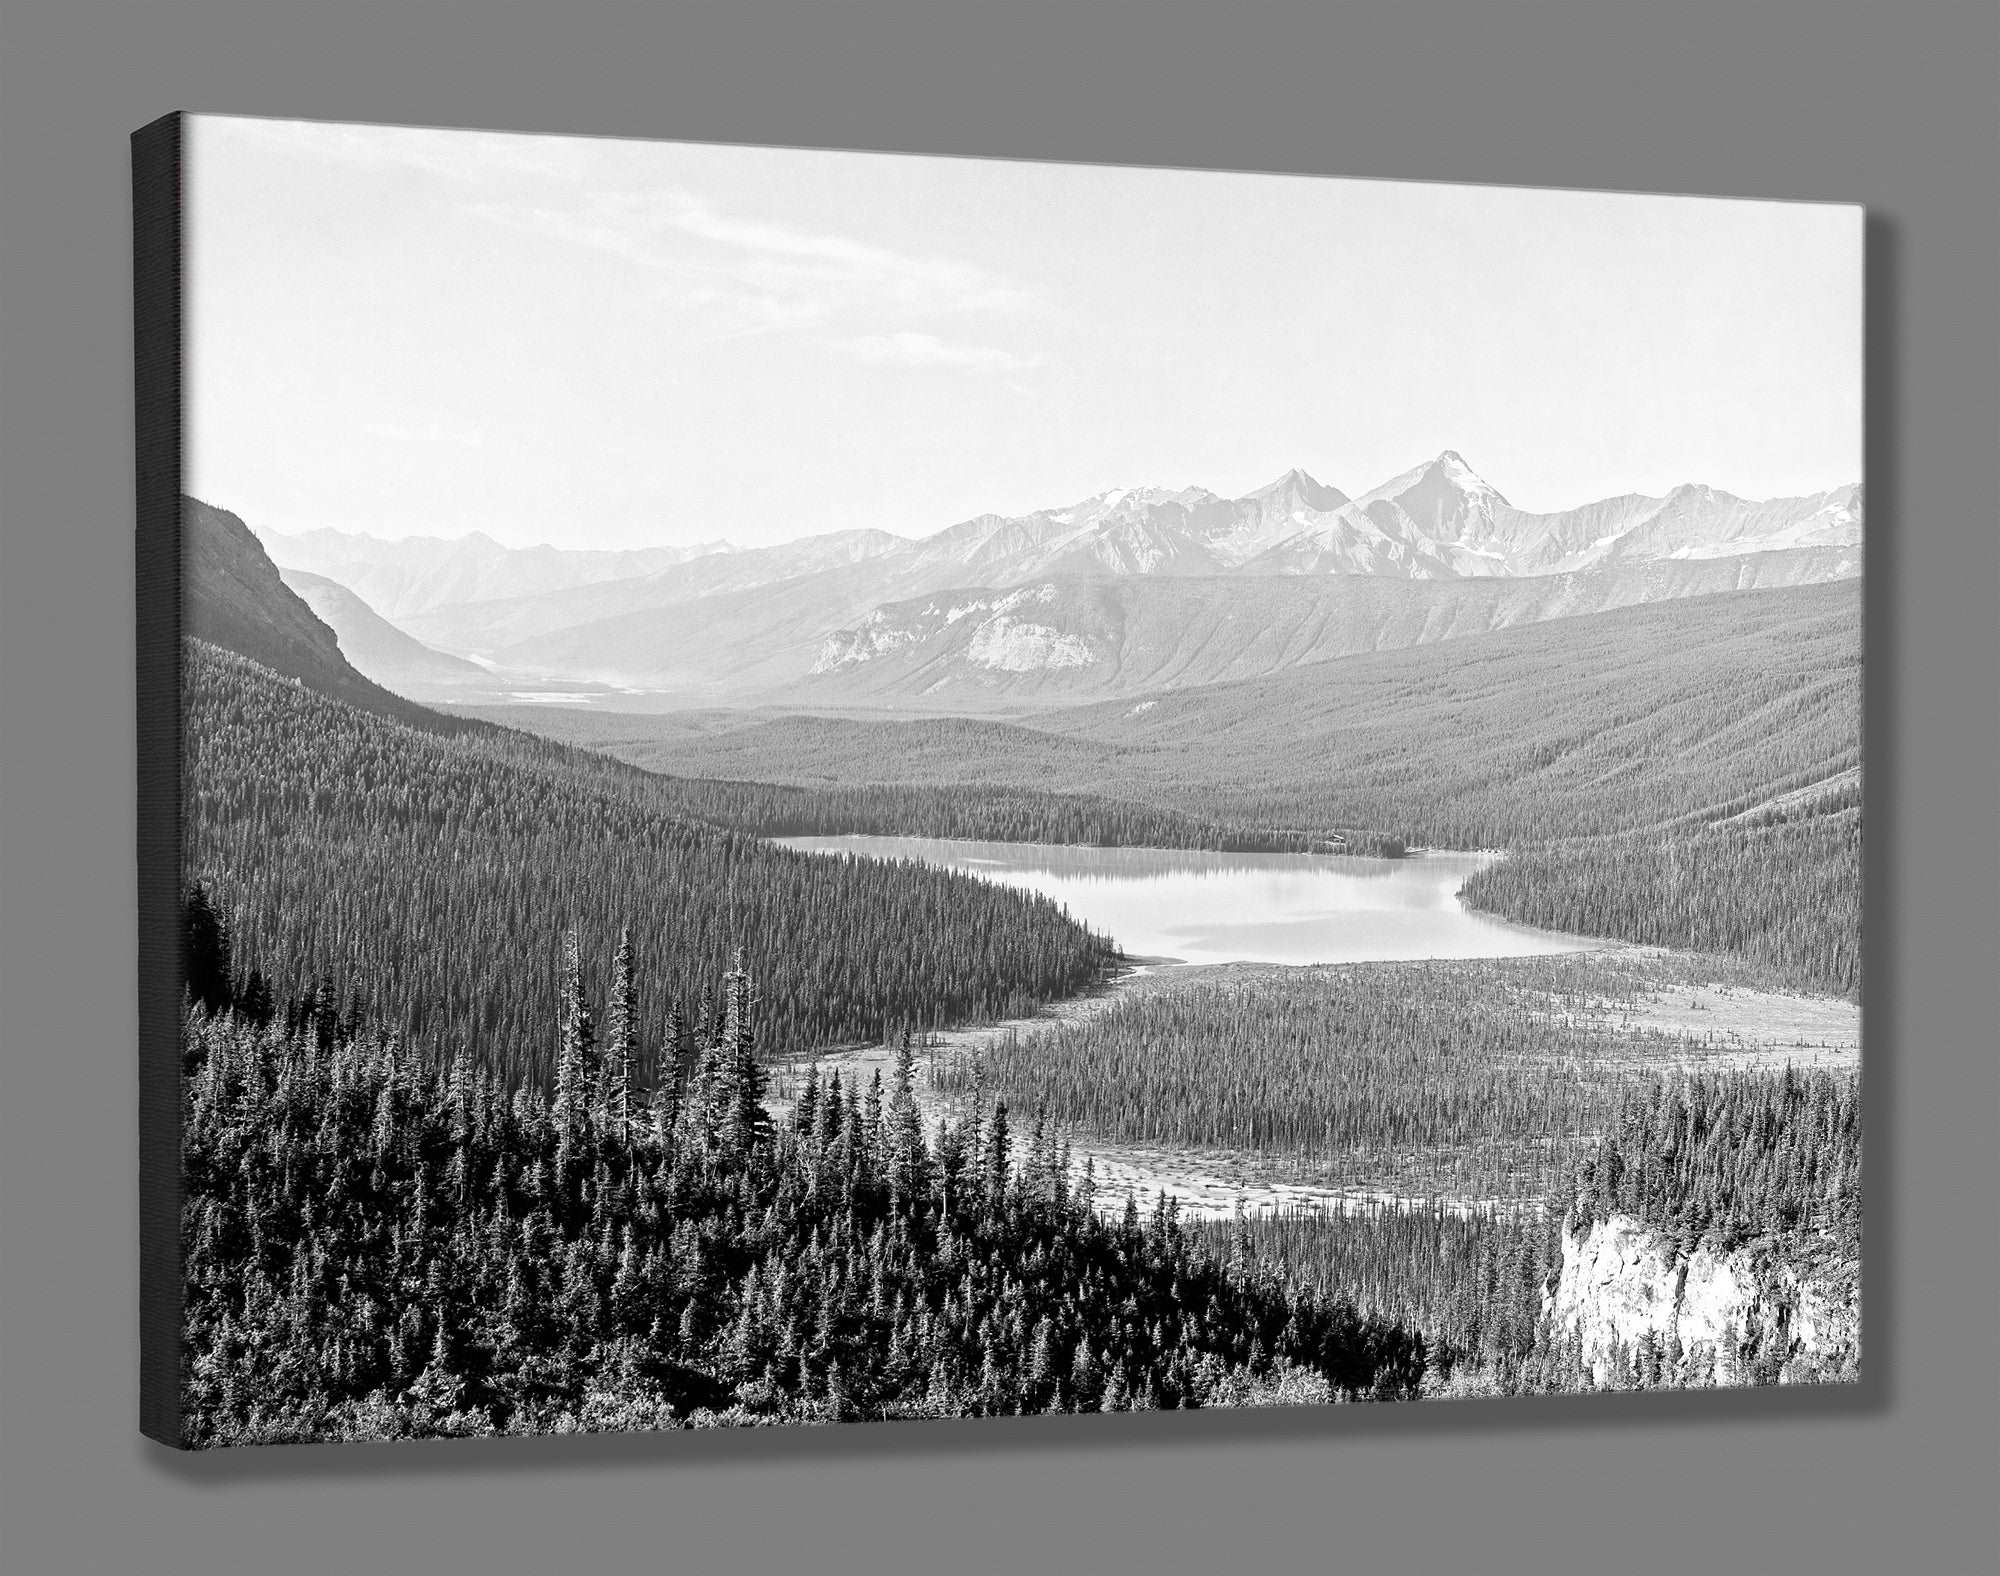 A mockup of an archival canvas print of a black and white vintage landscape photograph